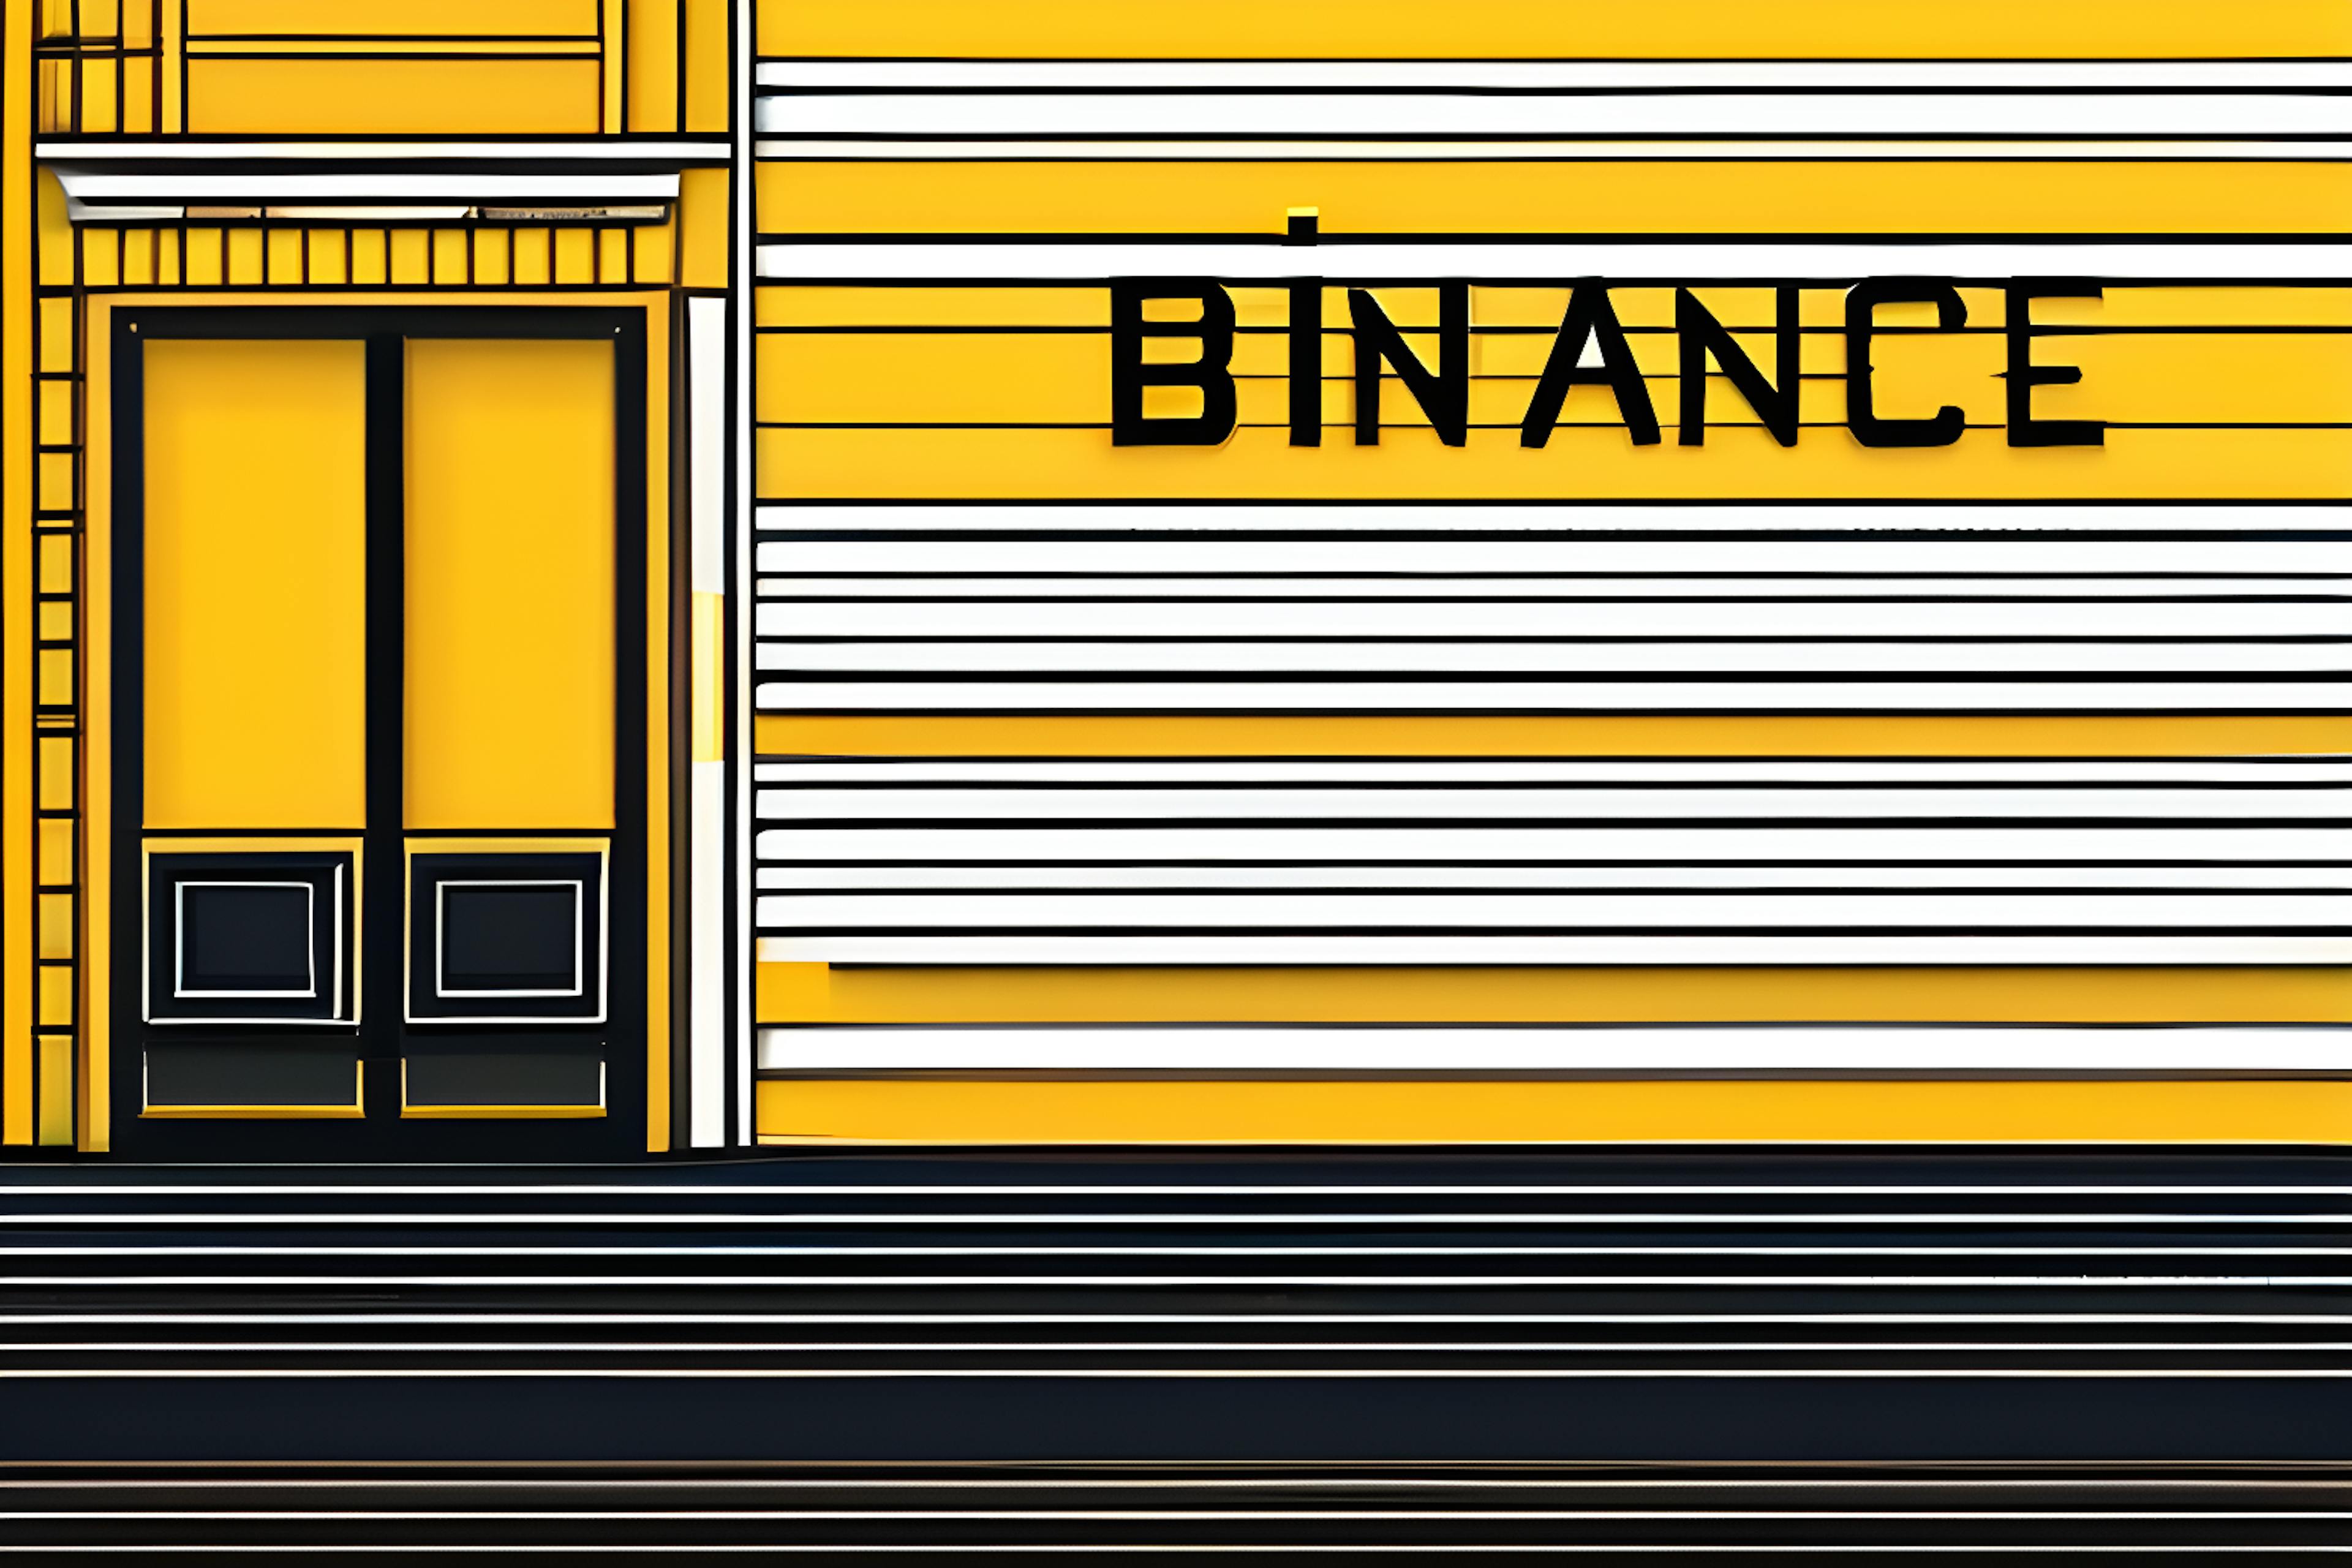 featured image - Binance Raises Regulatory Concerns Regarding Customers' Funds and Crypto Assets 